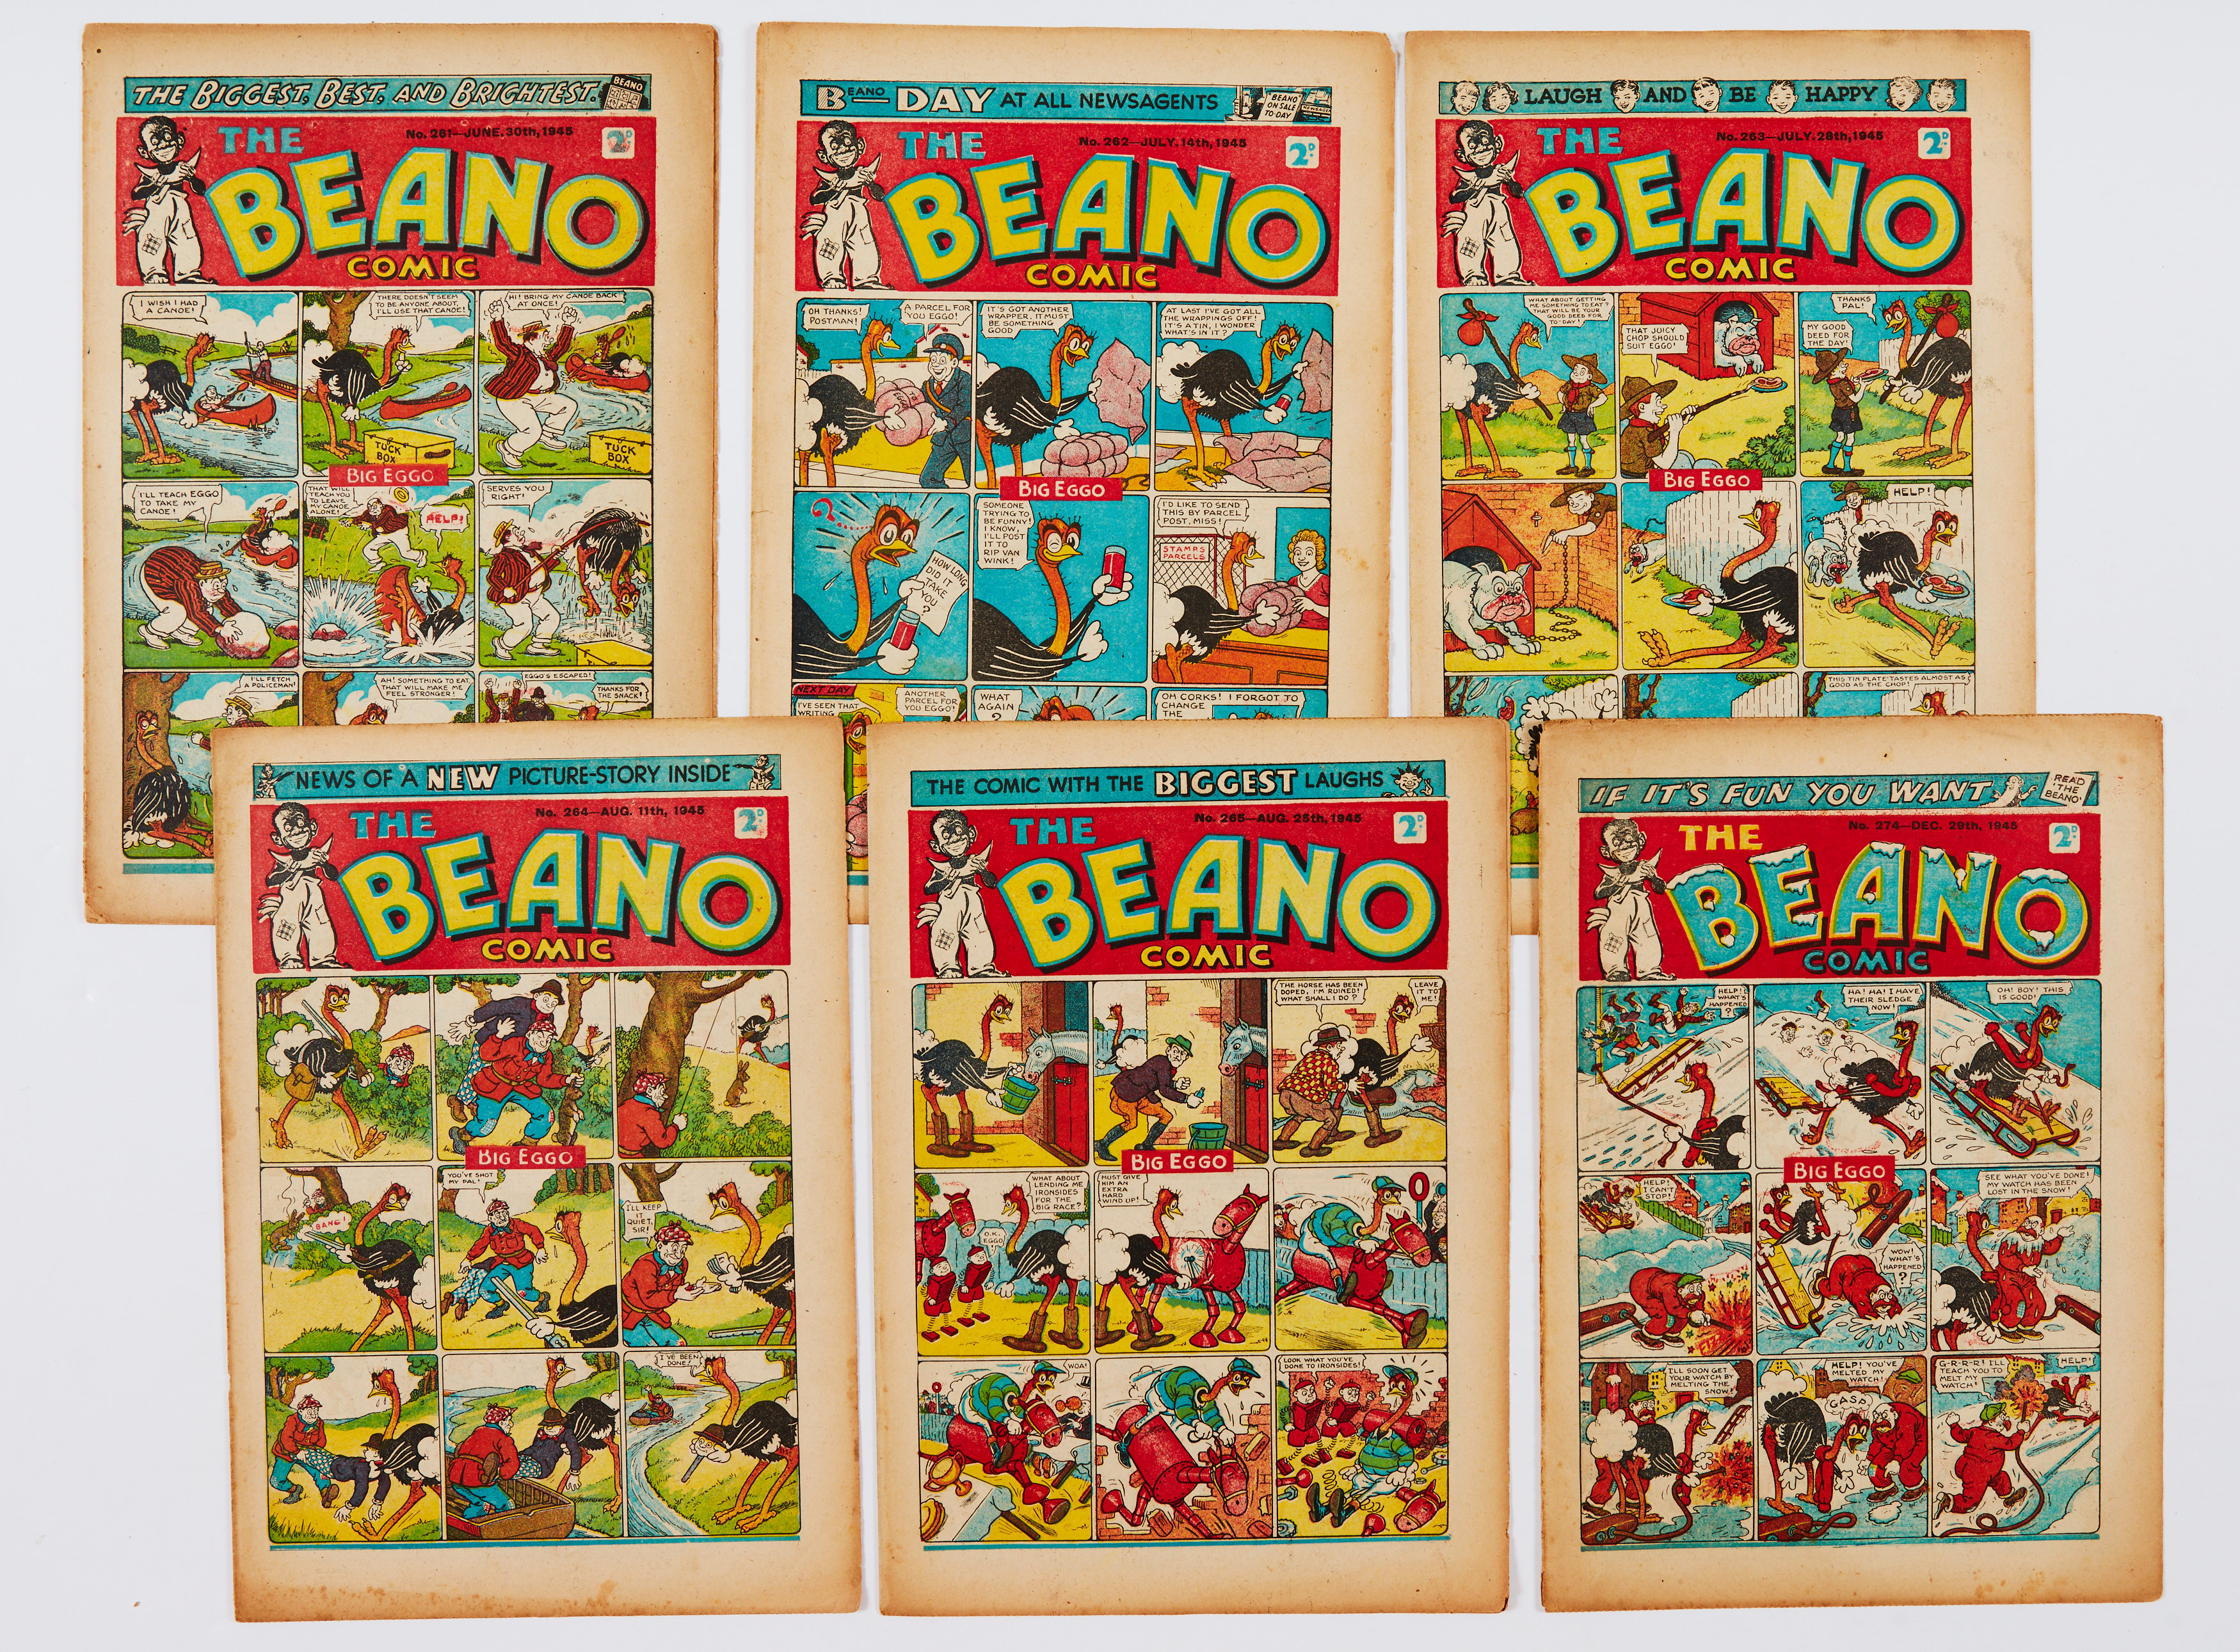 Beano (1945) 261-265, 274. Propaganda war issues - Save Paper with Rip Van Wink and Pansy Potter.